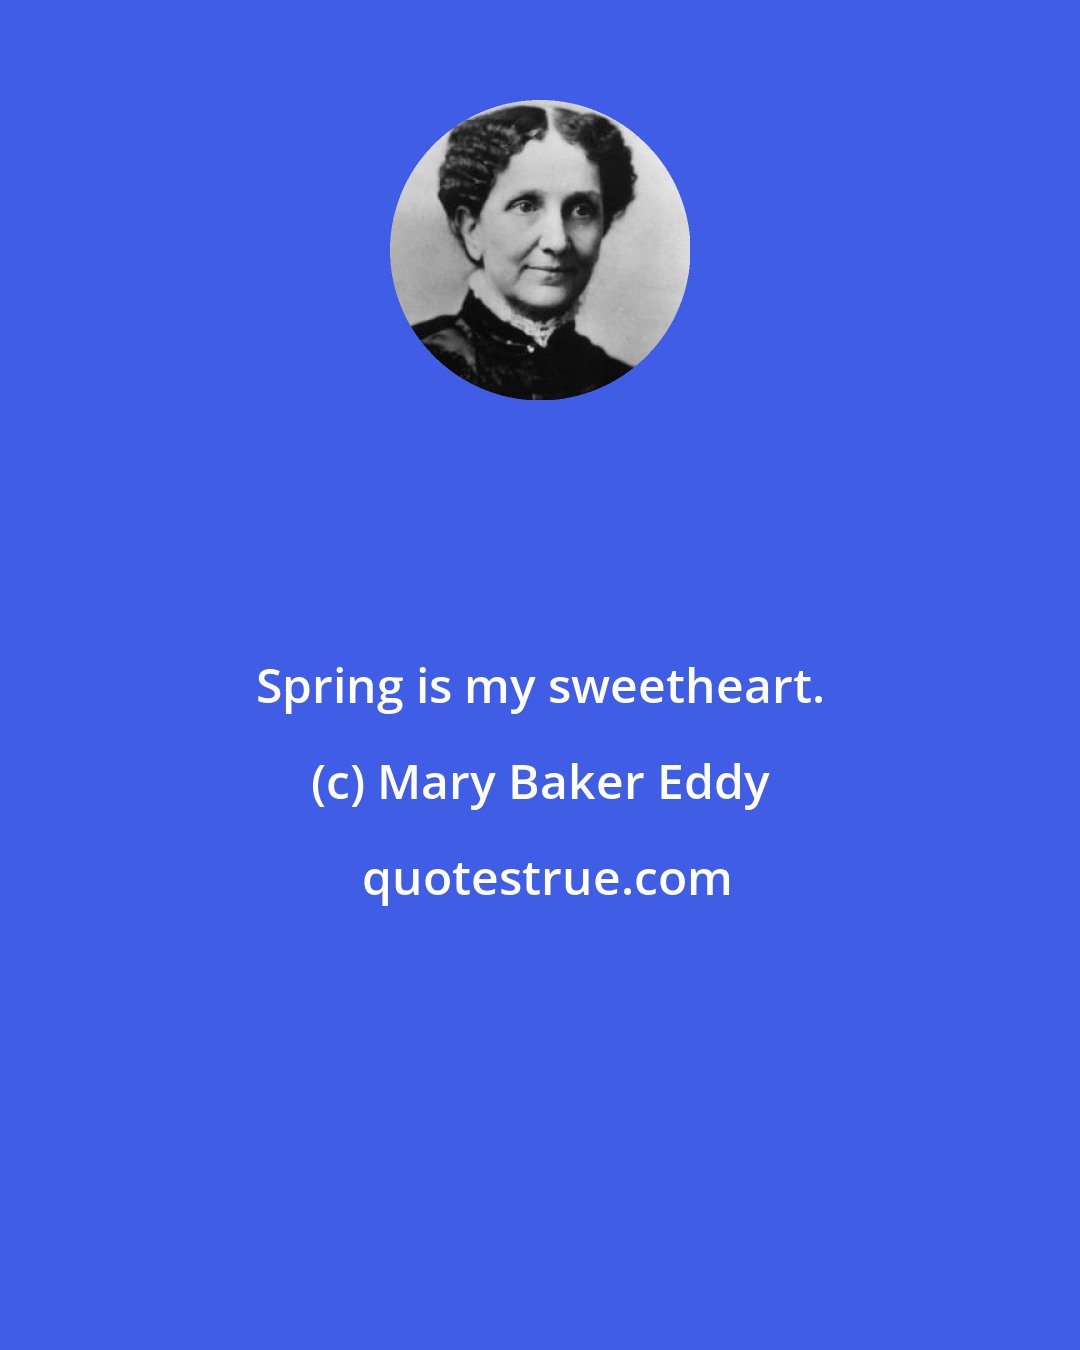 Mary Baker Eddy: Spring is my sweetheart.